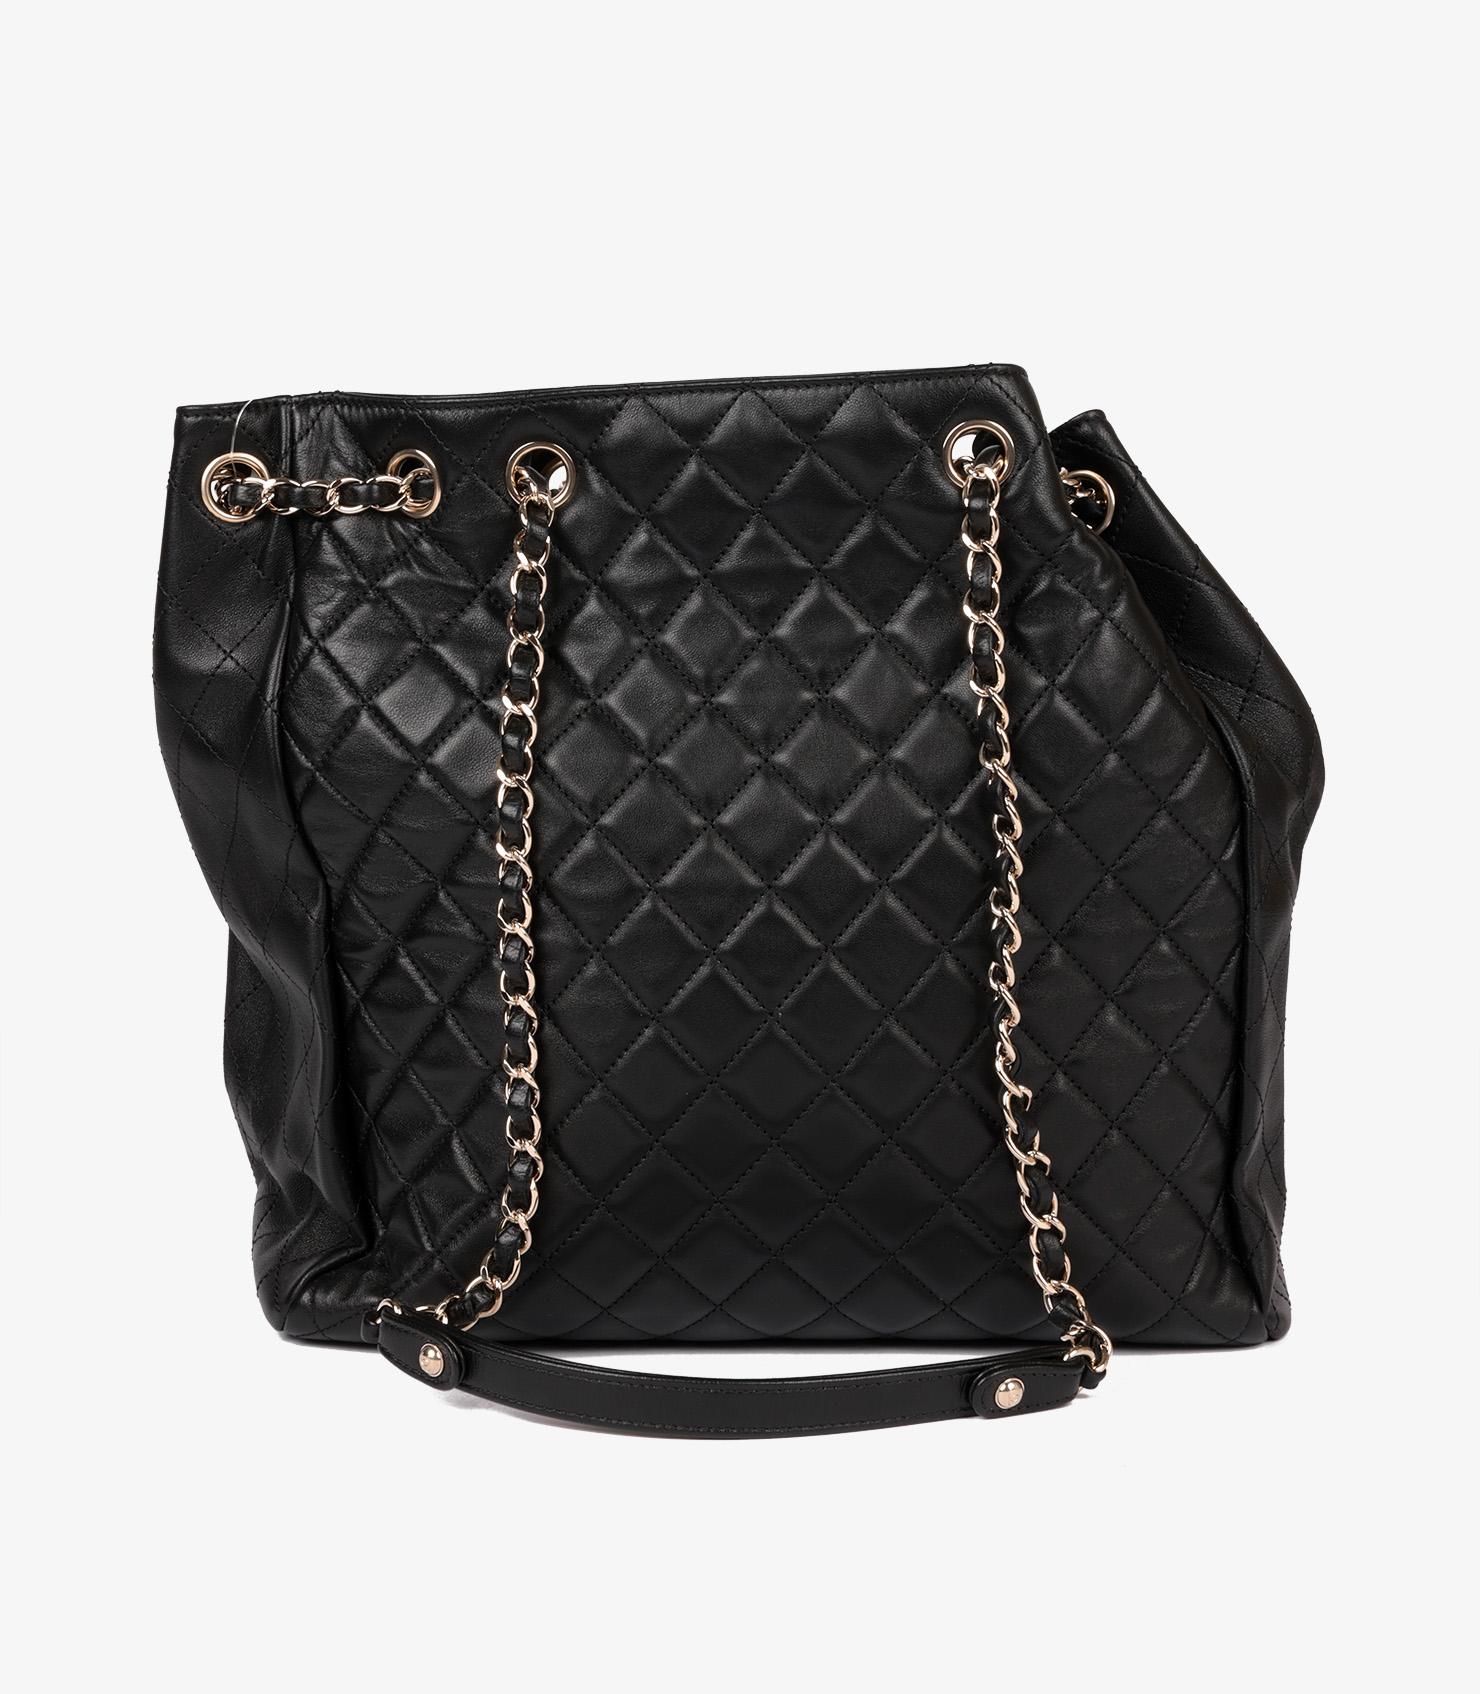 Chanel Black Quilted Lambskin Large Classic Bucket Bag For Sale 1